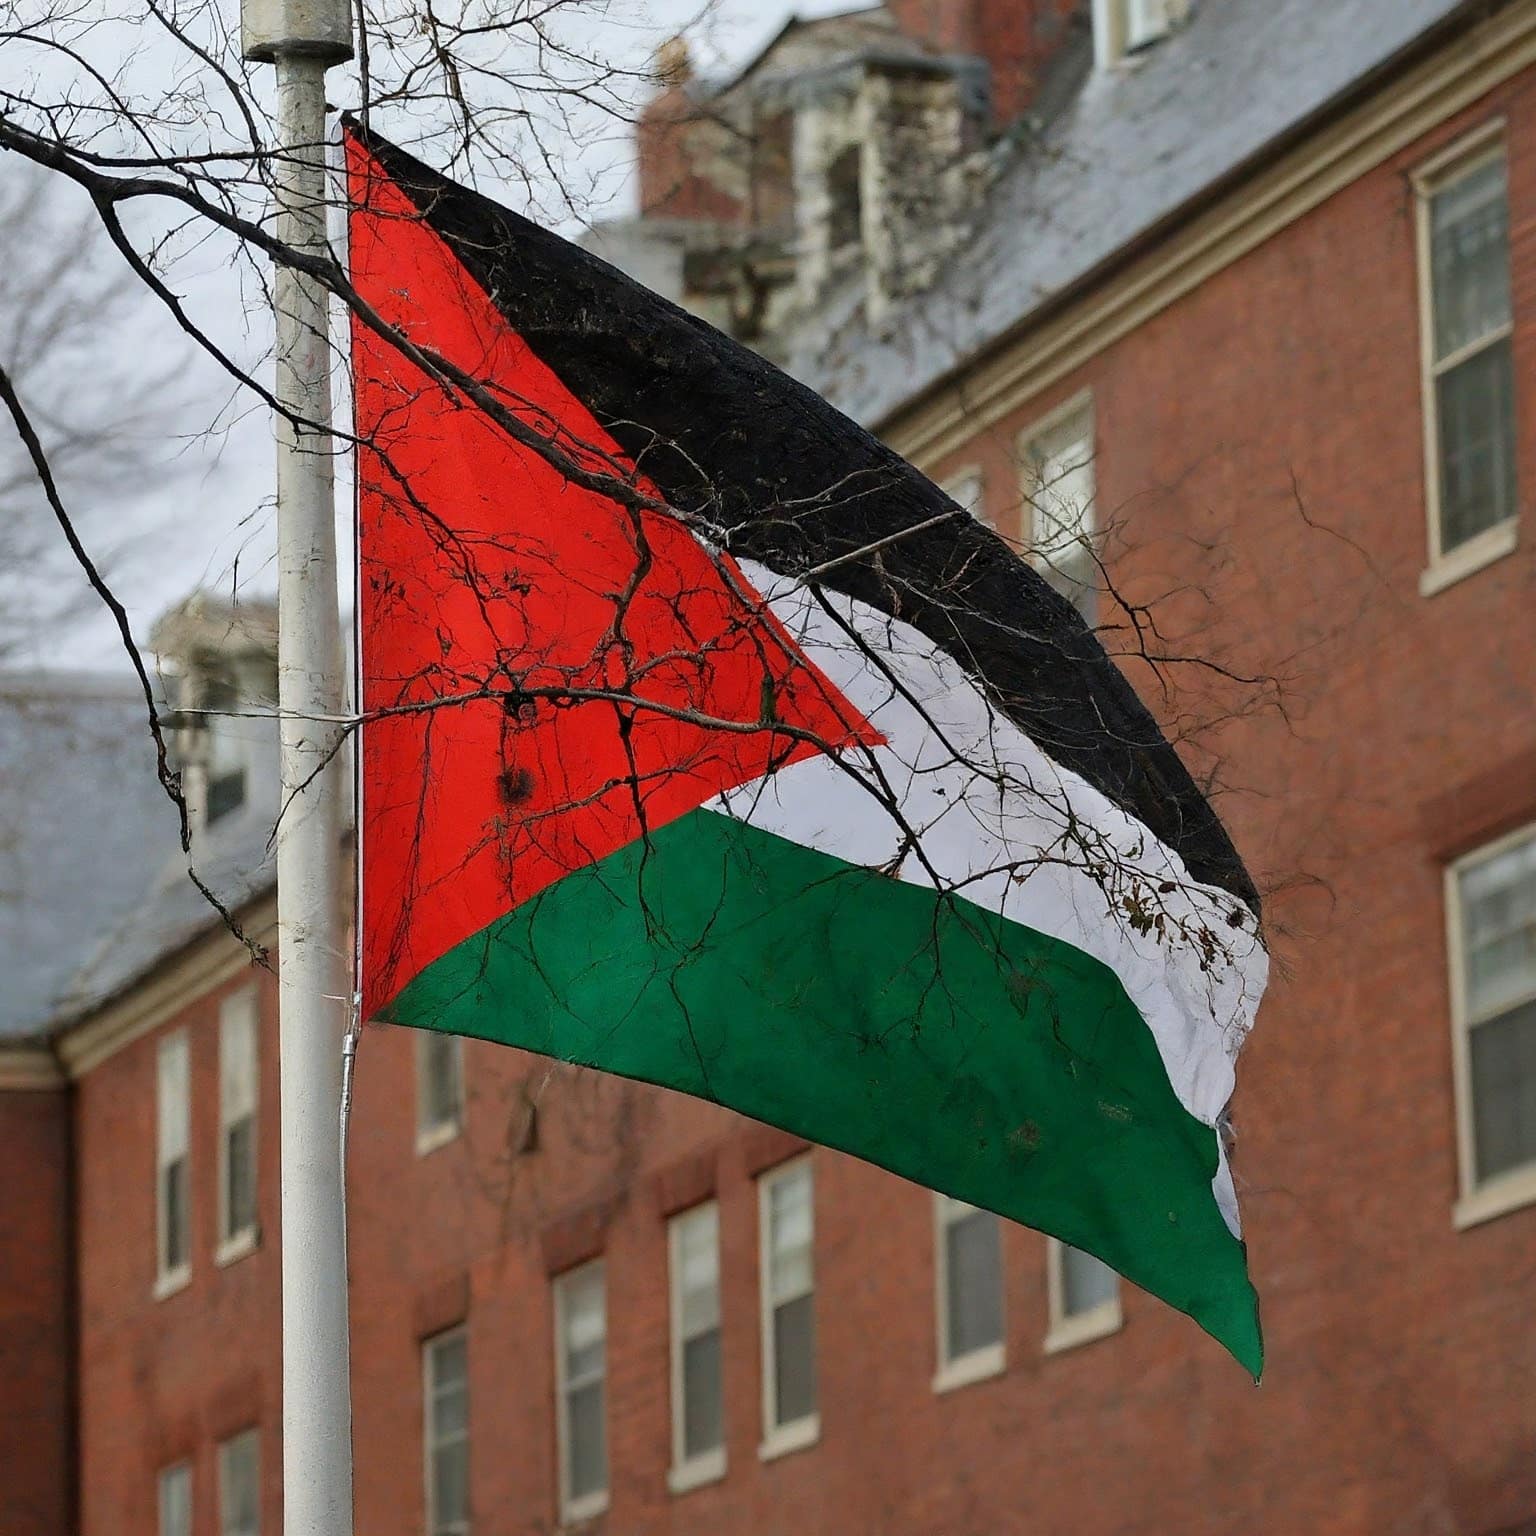 Harvard anti-Israel protesters replace American flag with Palestinian flag